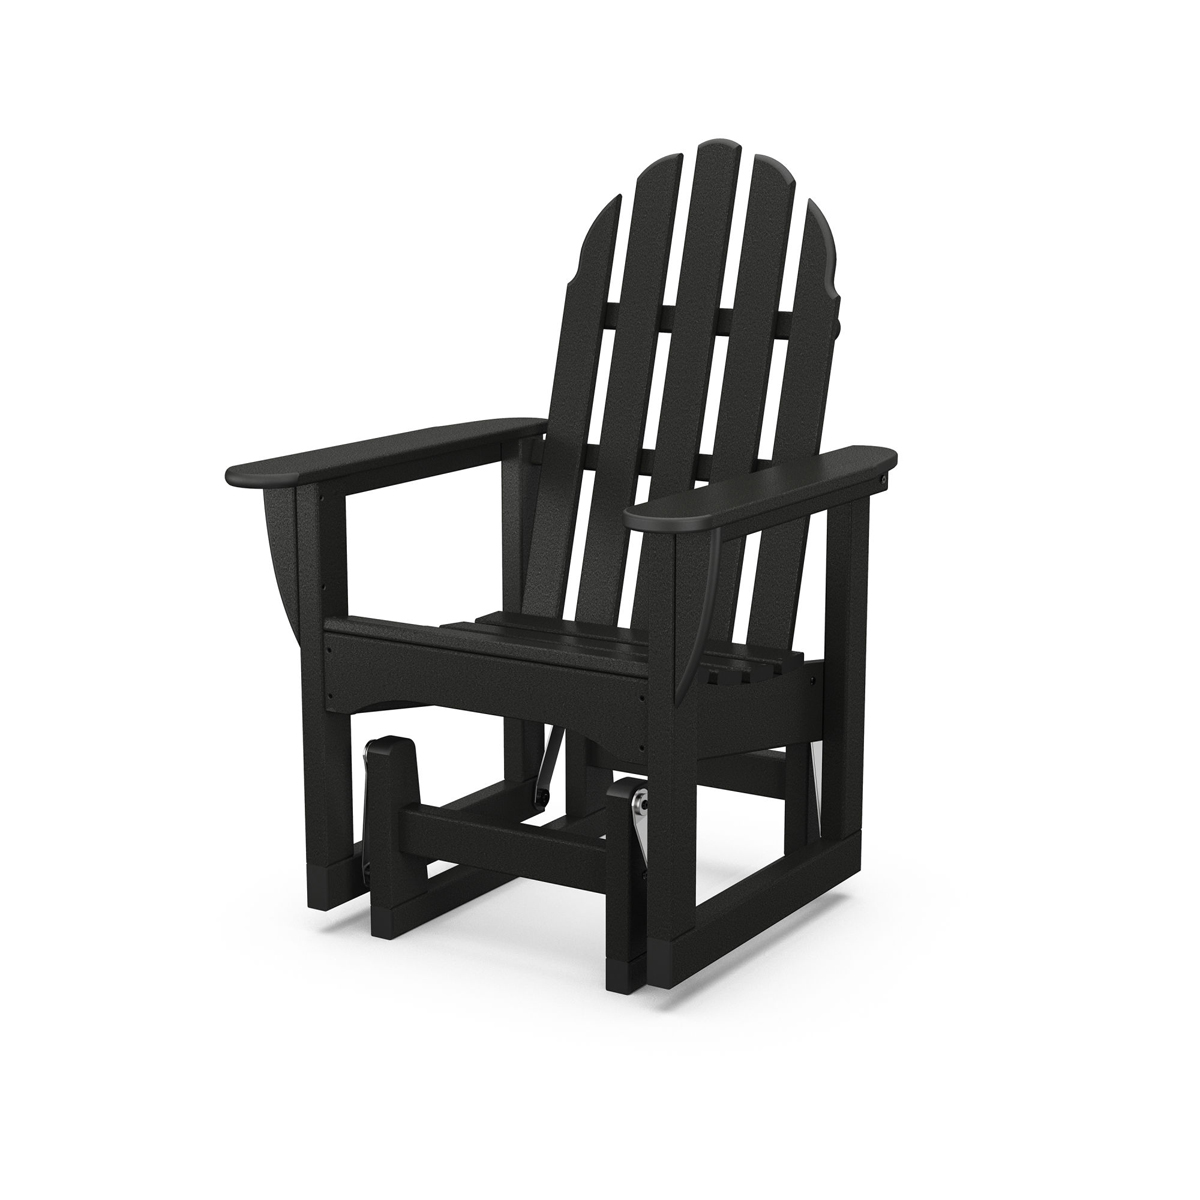 classic adirondack glider chair in black product image